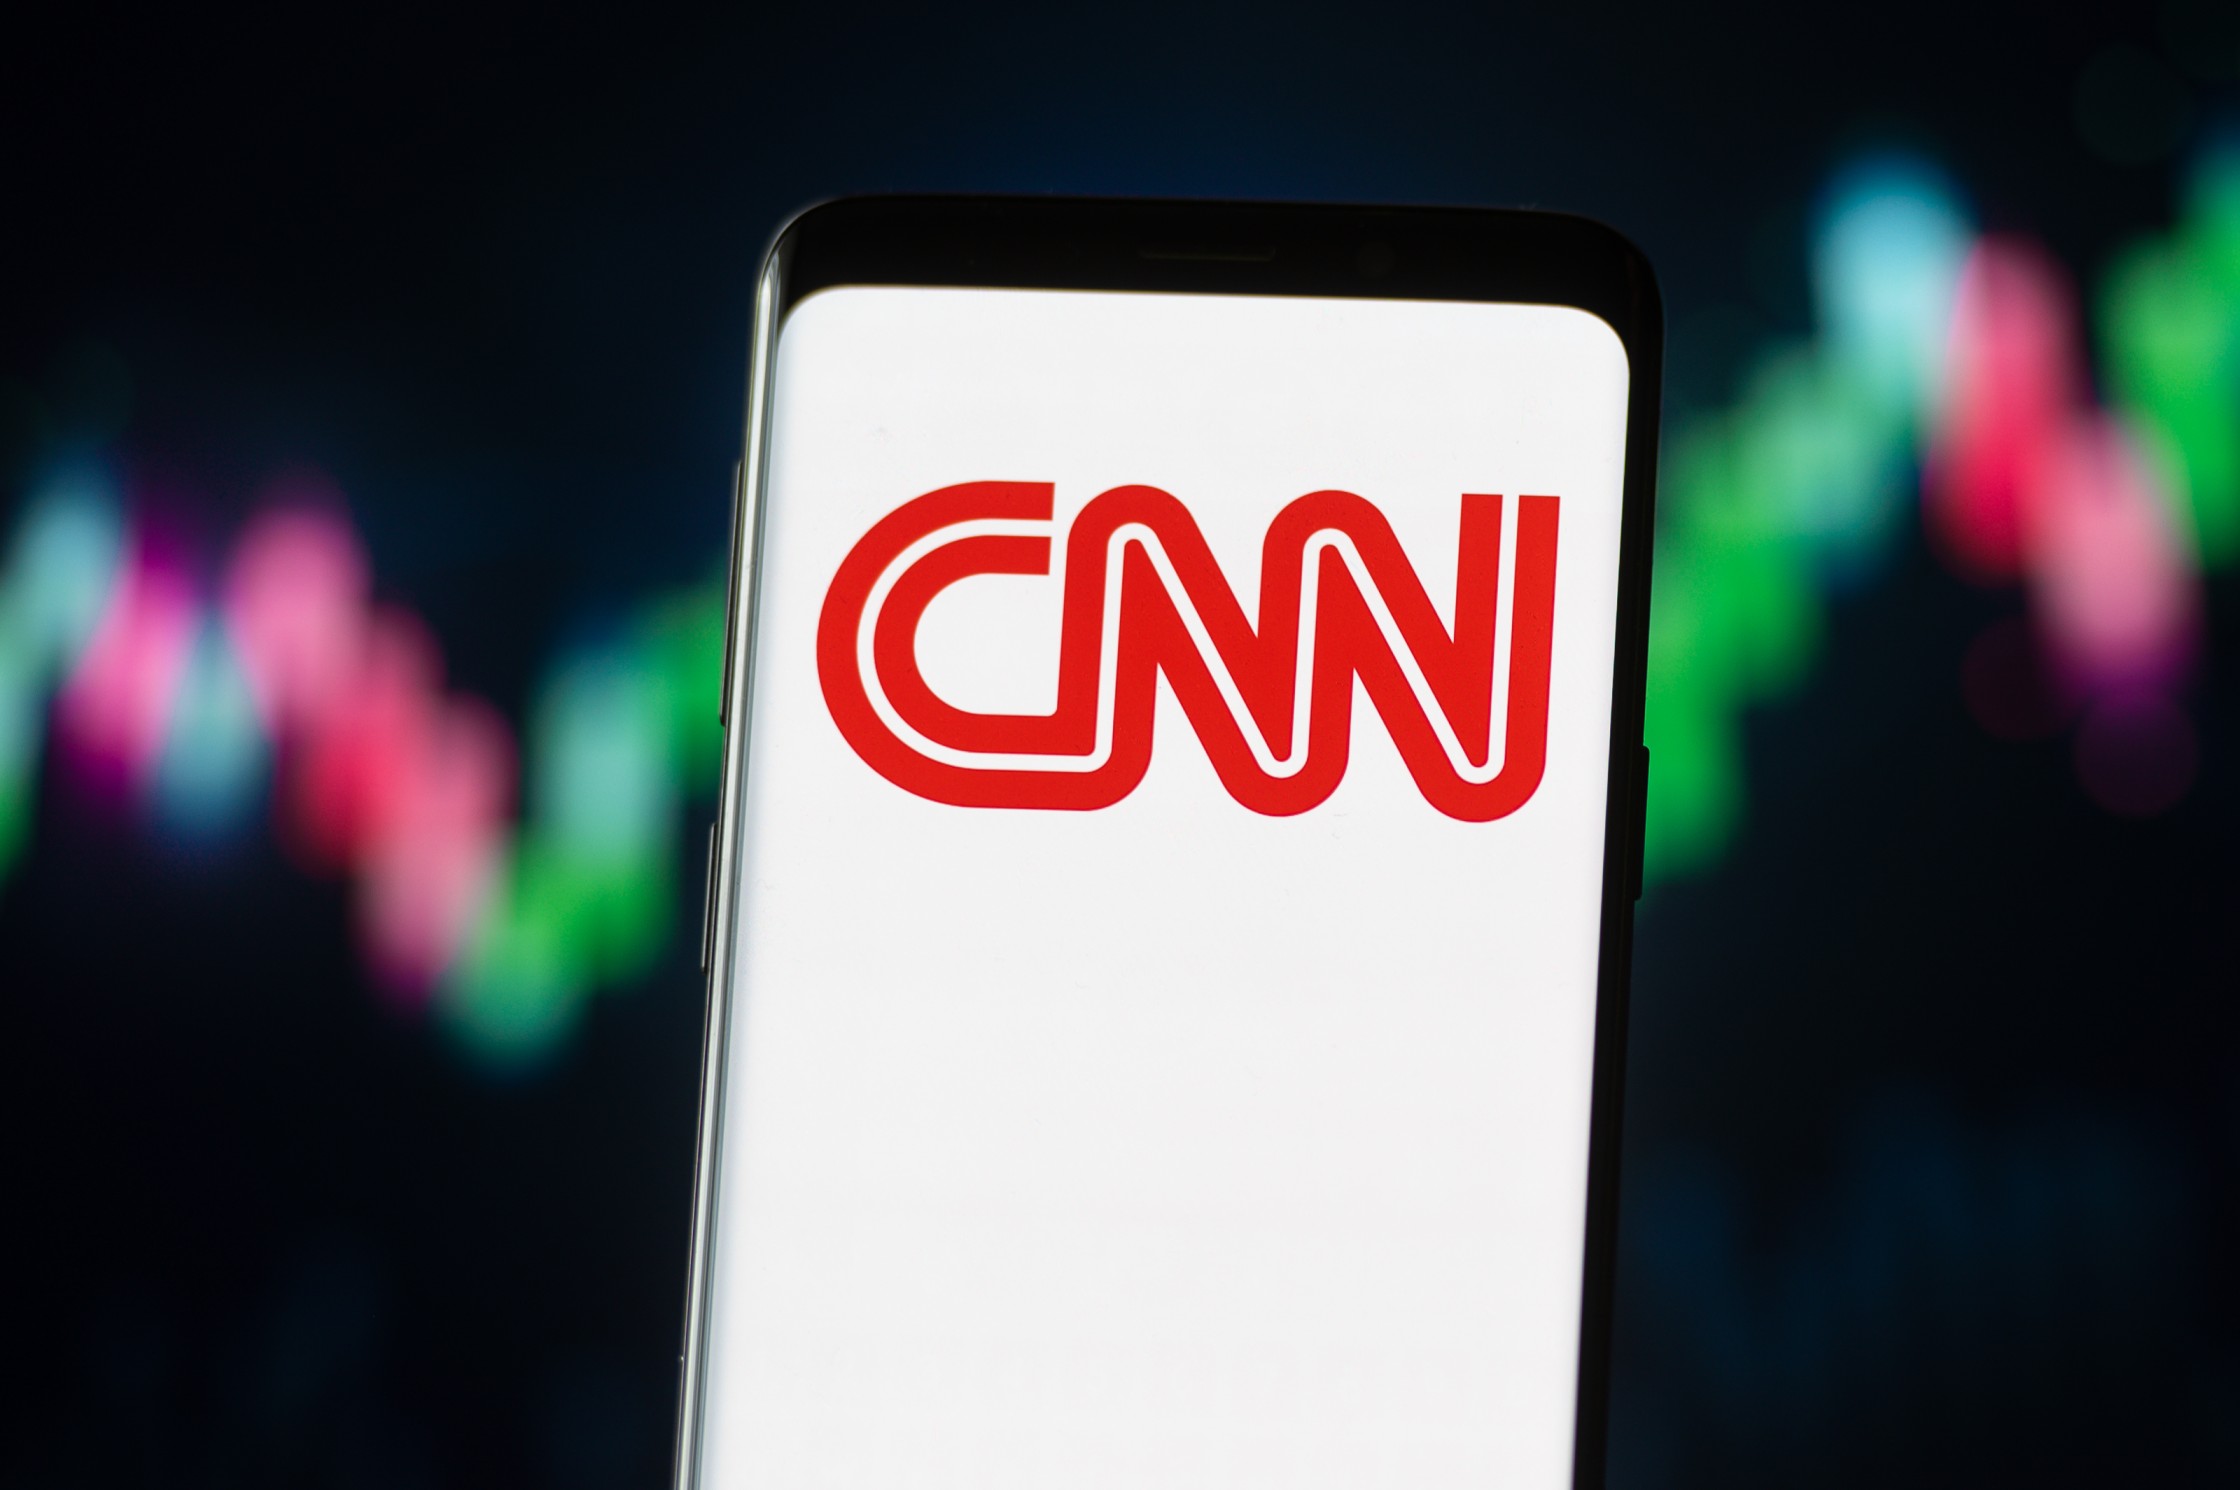 A picture of the CNN logo on a smart phone screen.